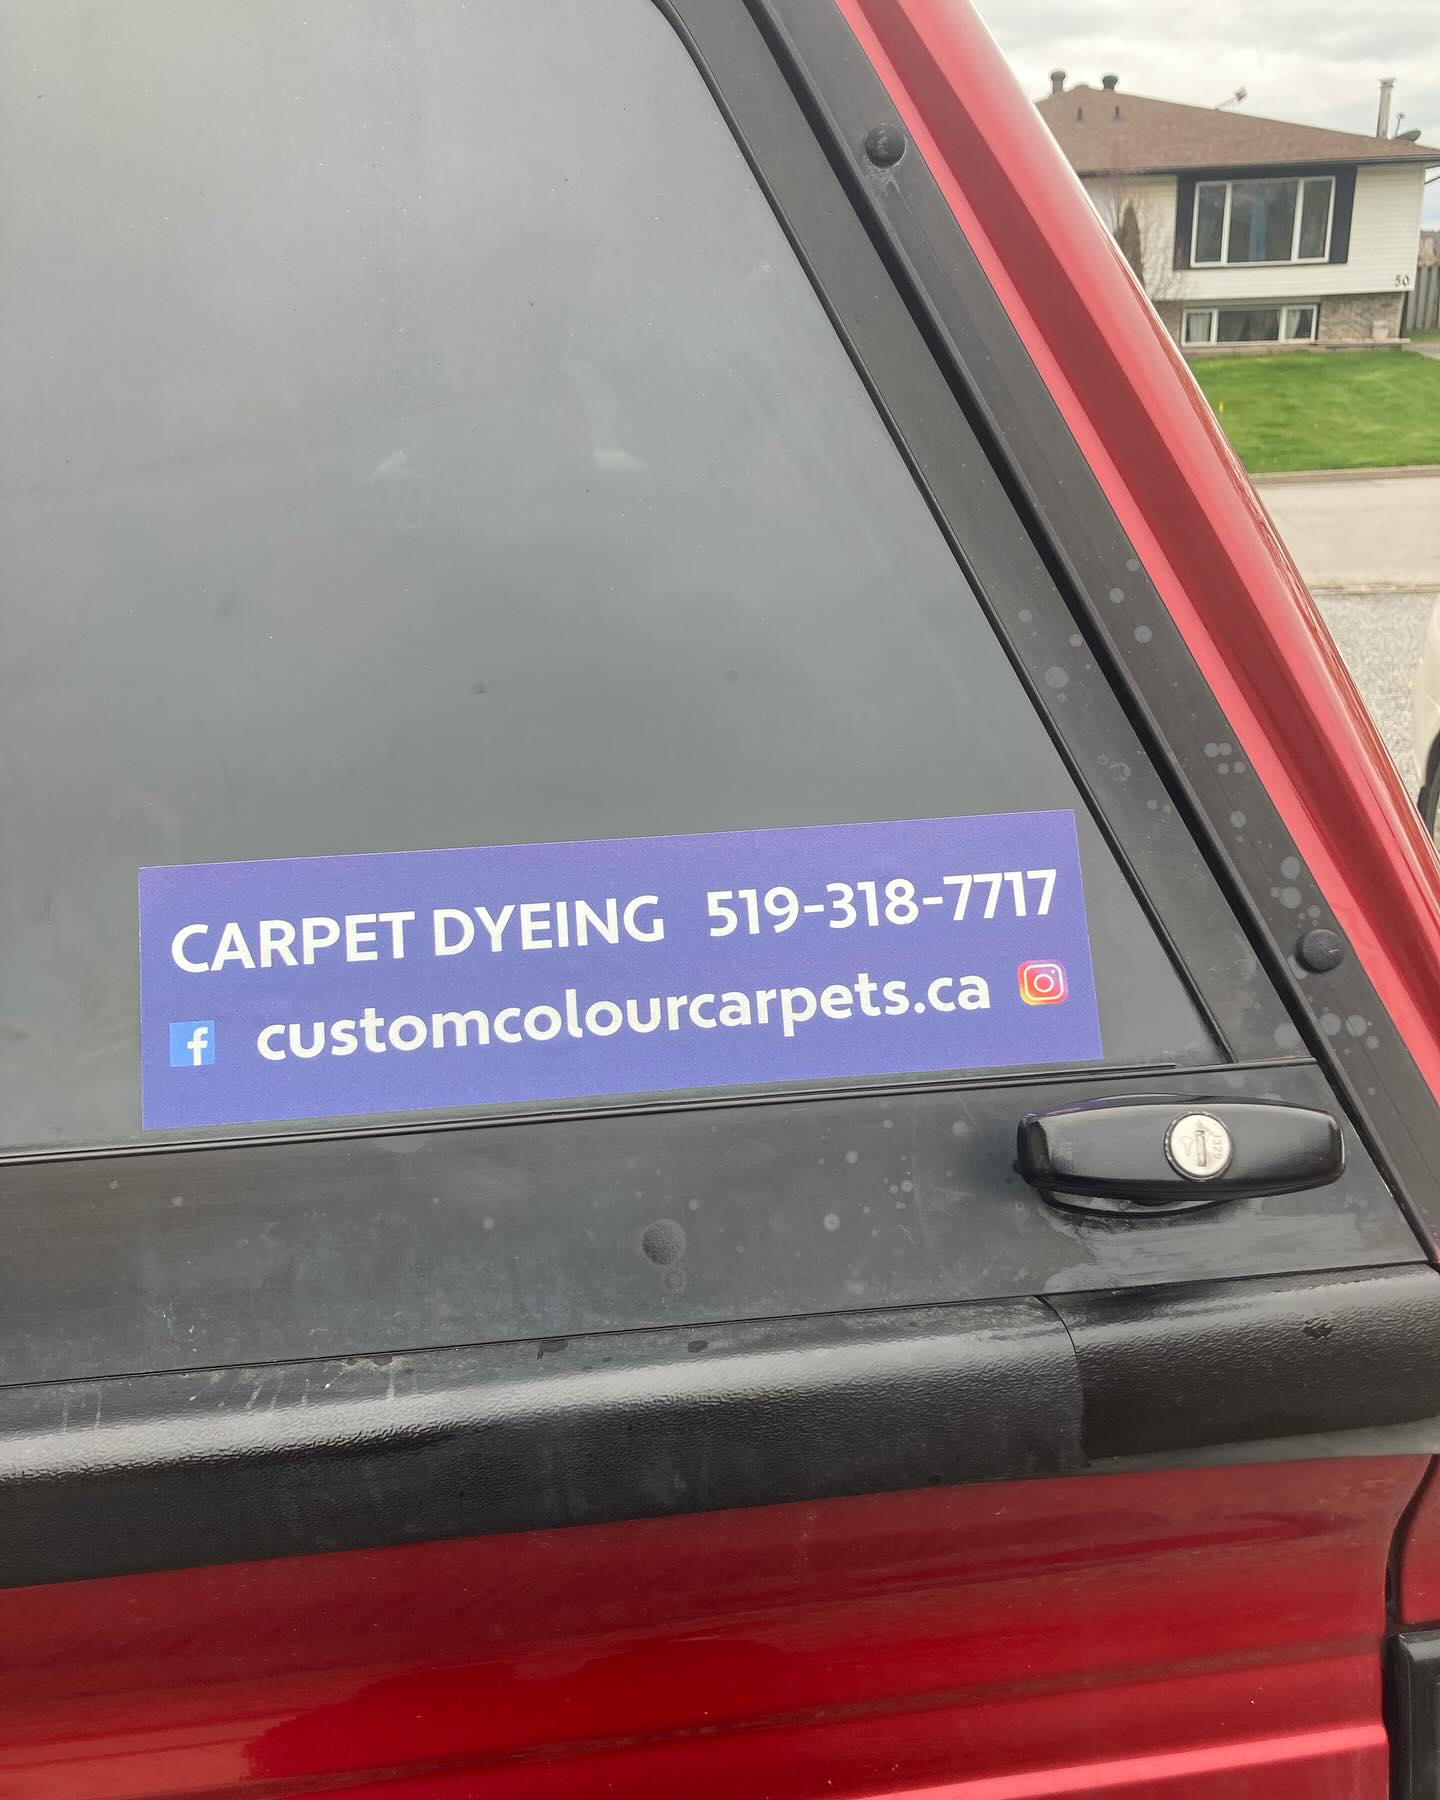 Custom Colour Carpets and Rugs 21 Manley Crescent, Thorold Ontario L2V 4K2